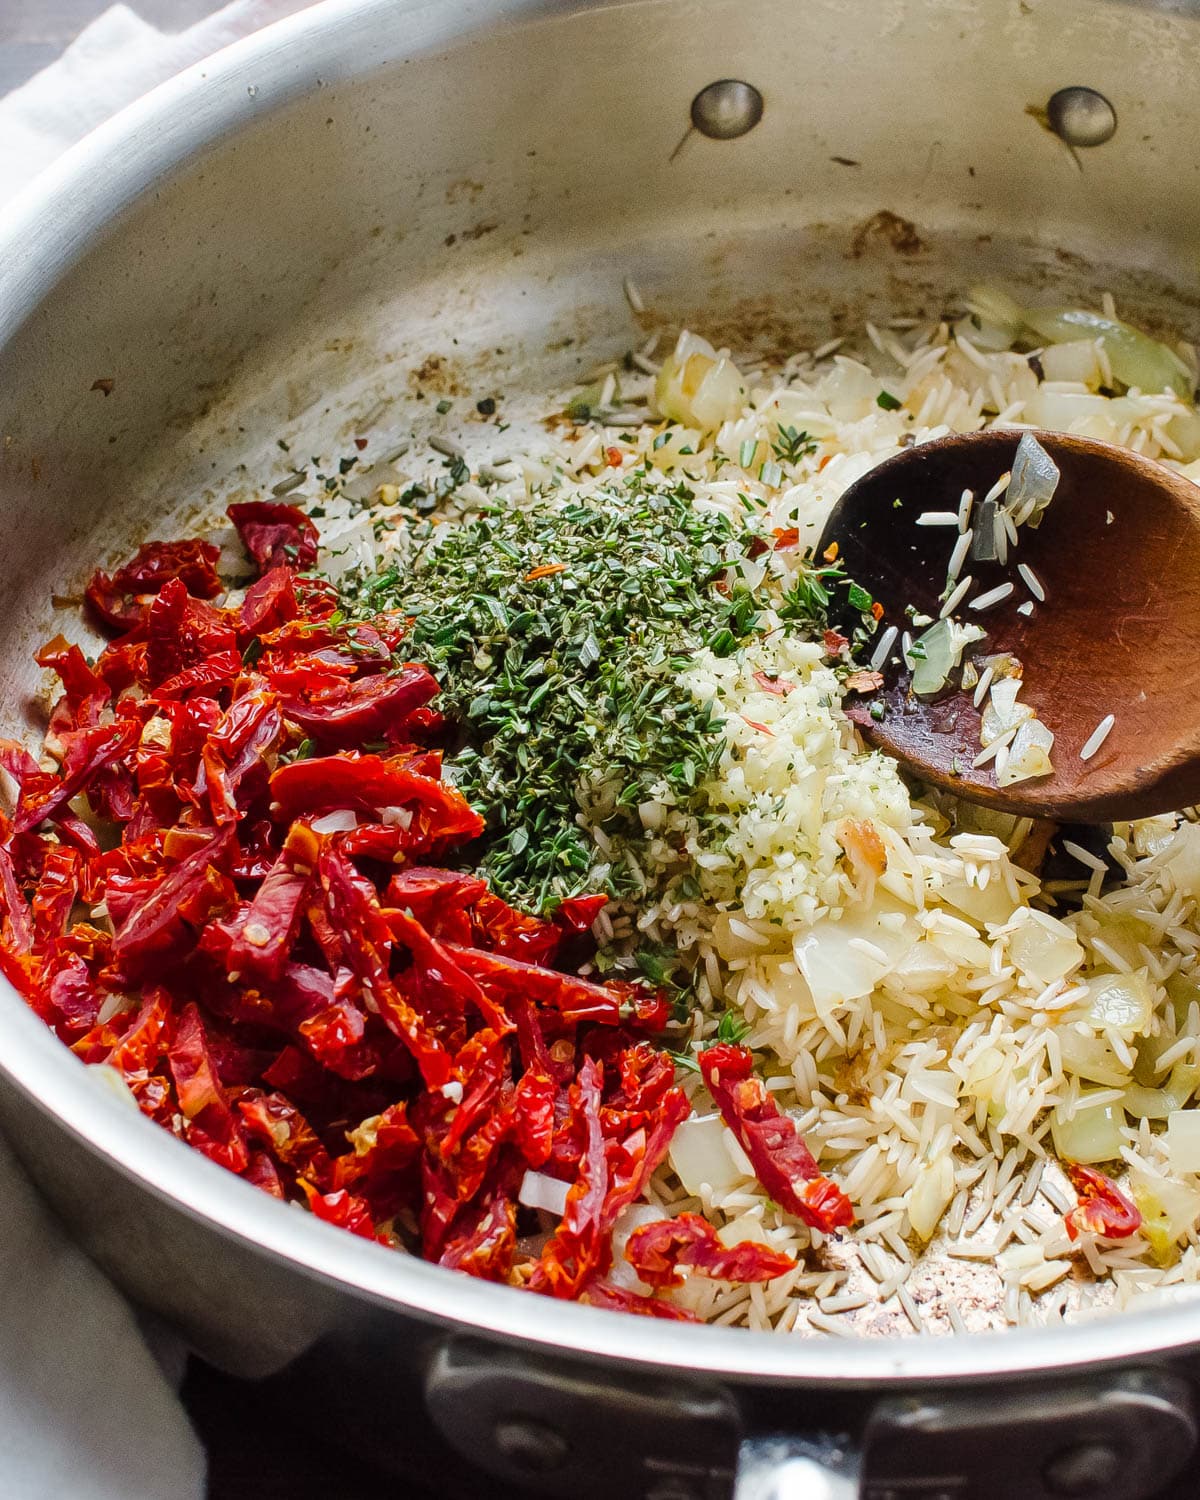 Adding chopped herbs and sun-dried tomatoes to the rice mixture.